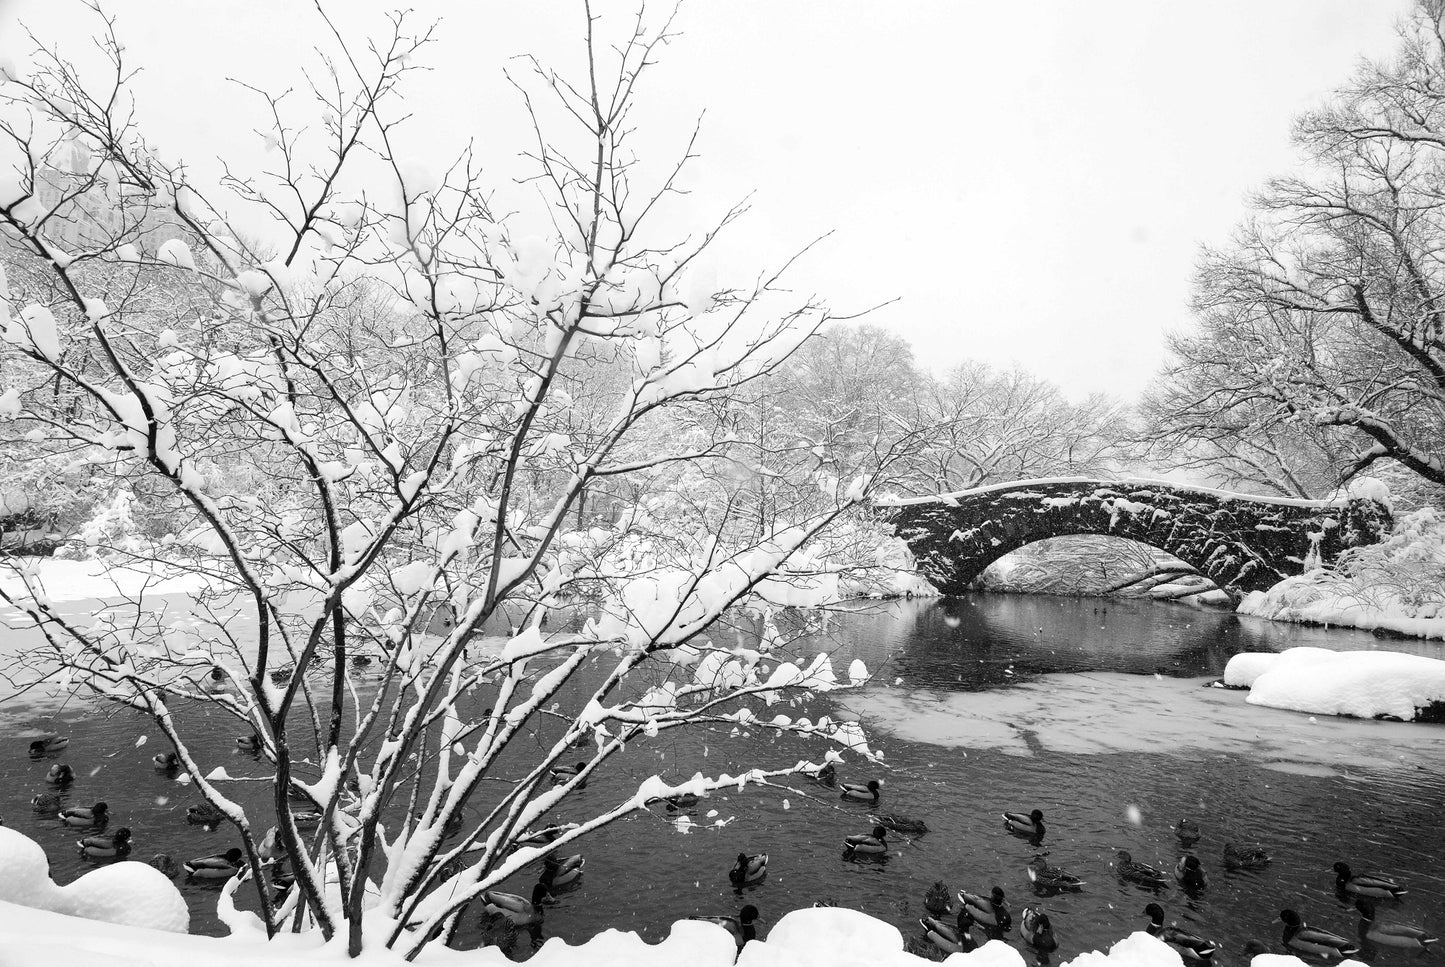 Gapstow Bridge and ducks on the lake help frame the tree  in this snowy Central Park scene.